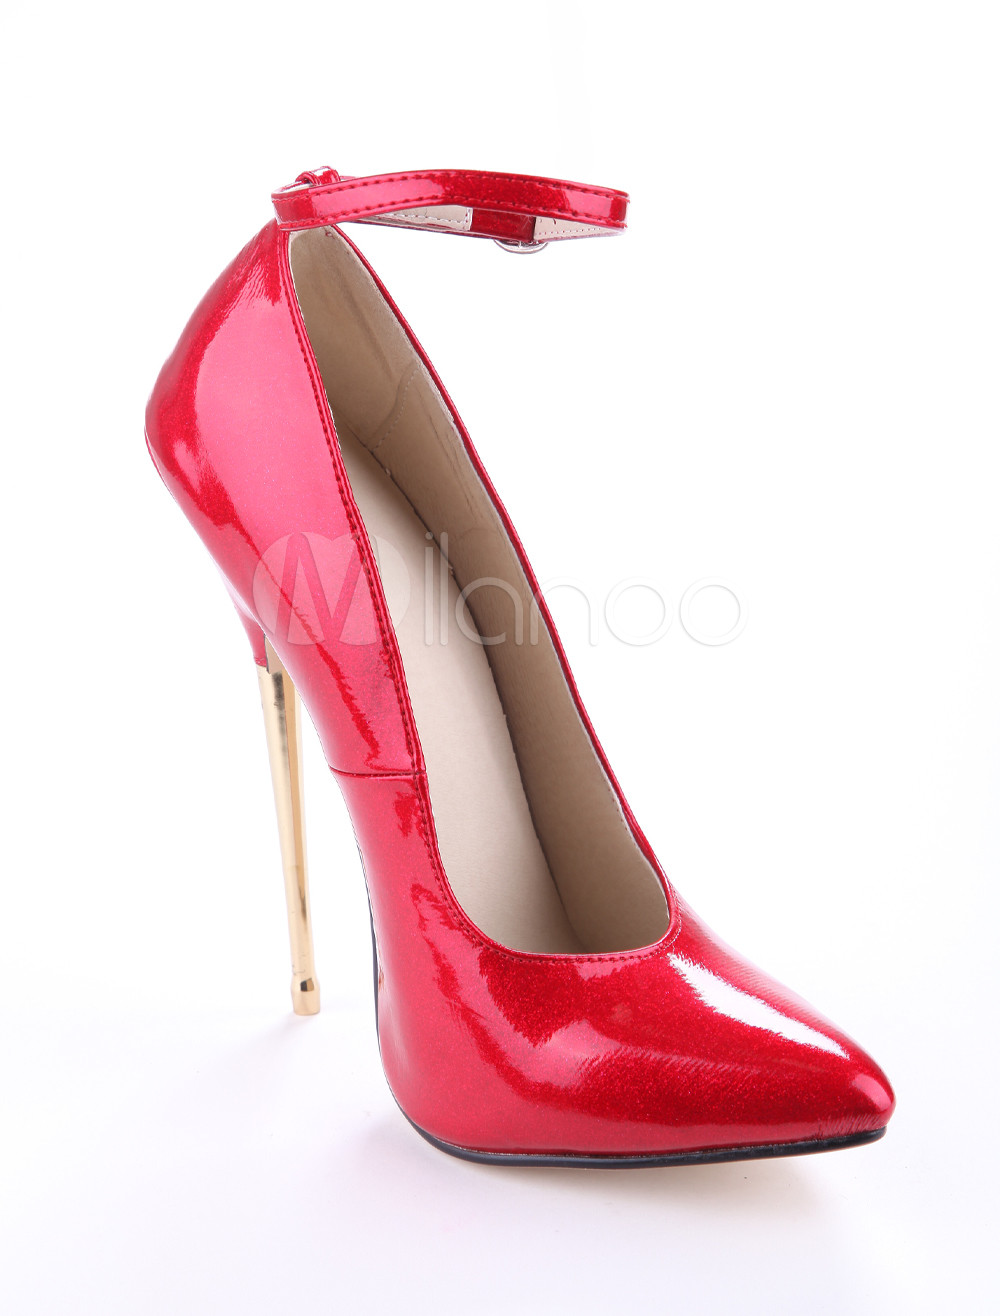 Red Patent Leather High Heels - Milanoo.com